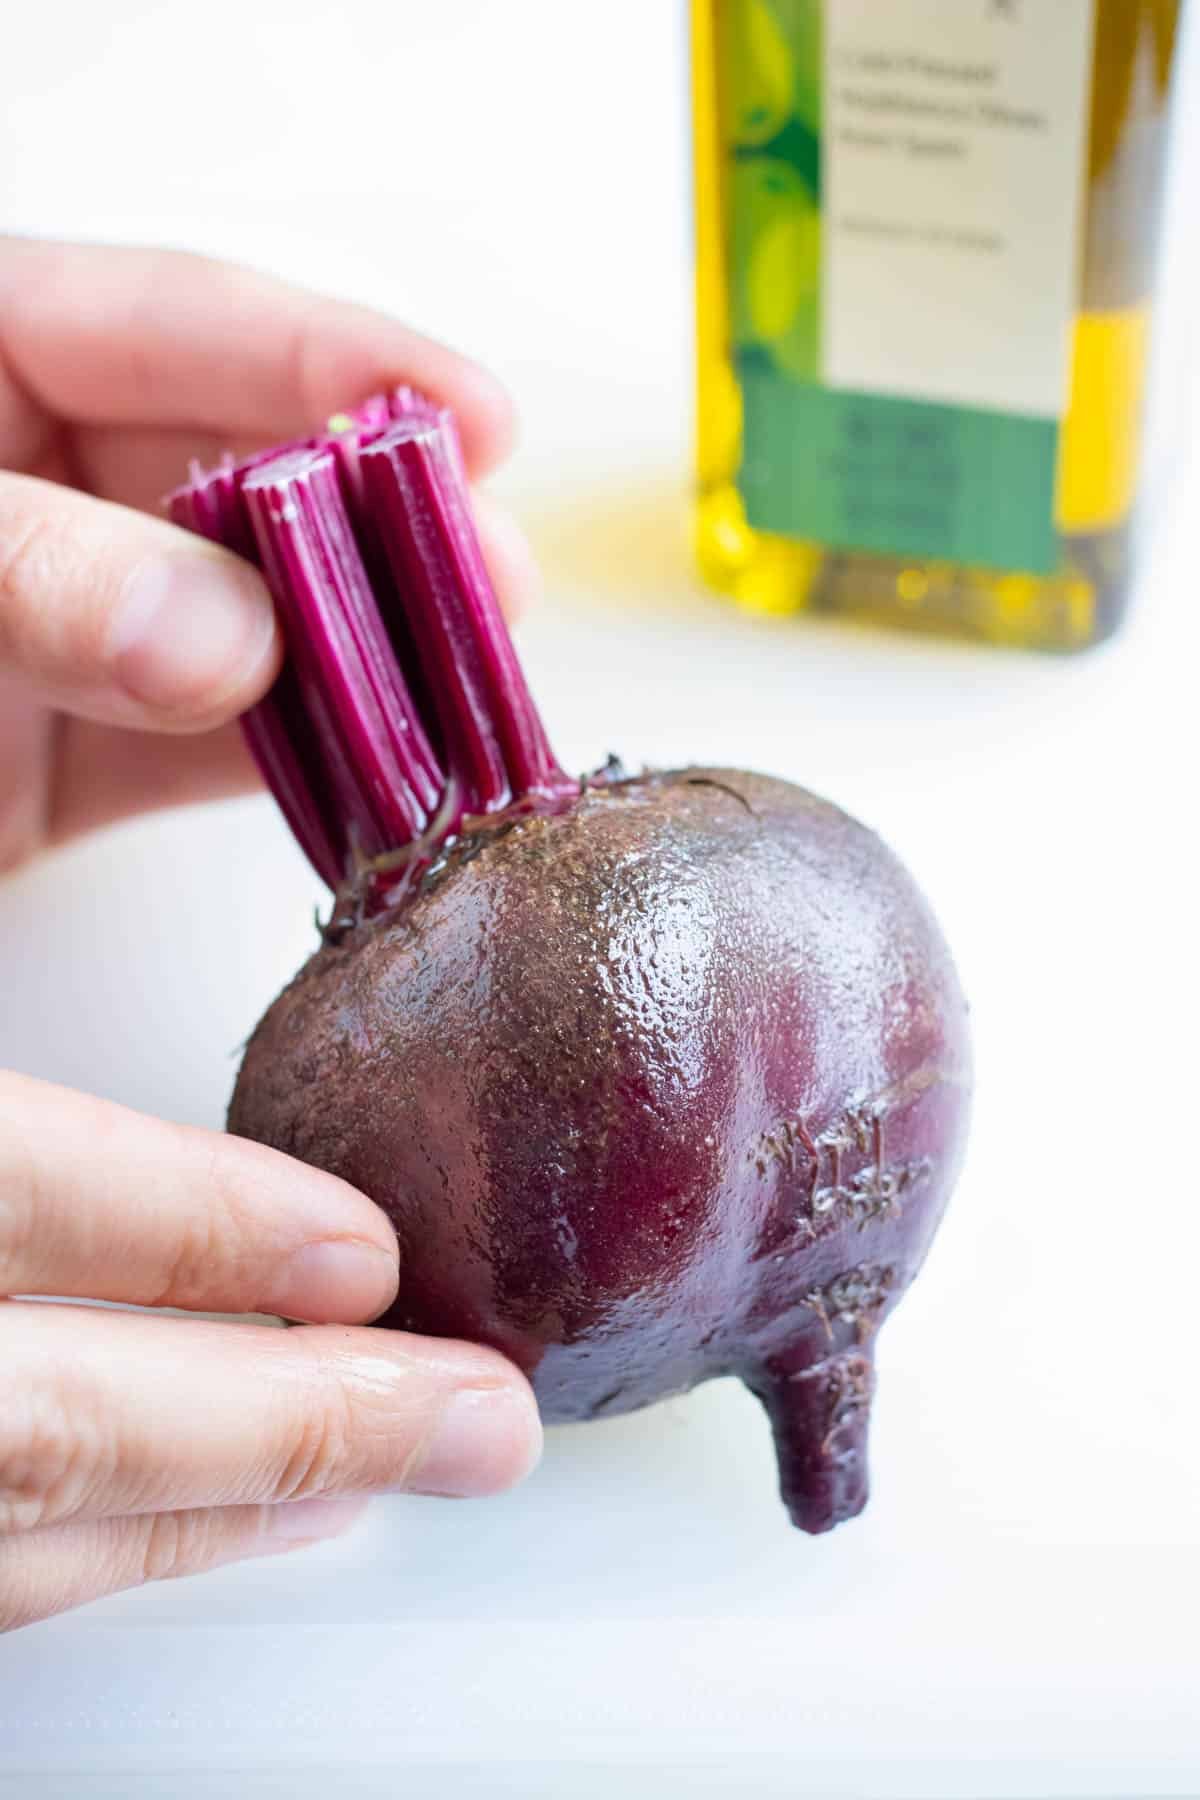 Olive oil is rubbed all over the beets.